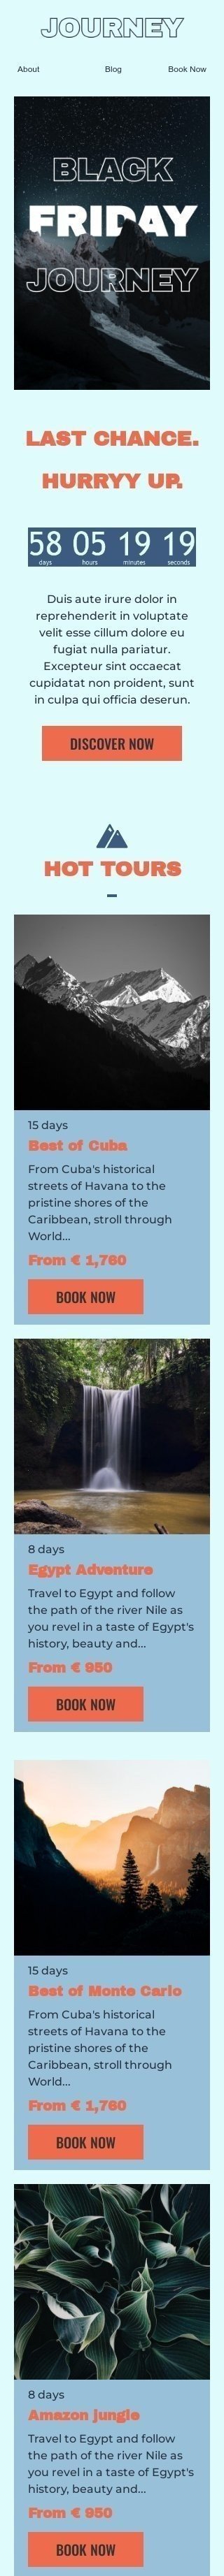 Black Friday Email Template "Black Friday journey" for Travel industry mobile view